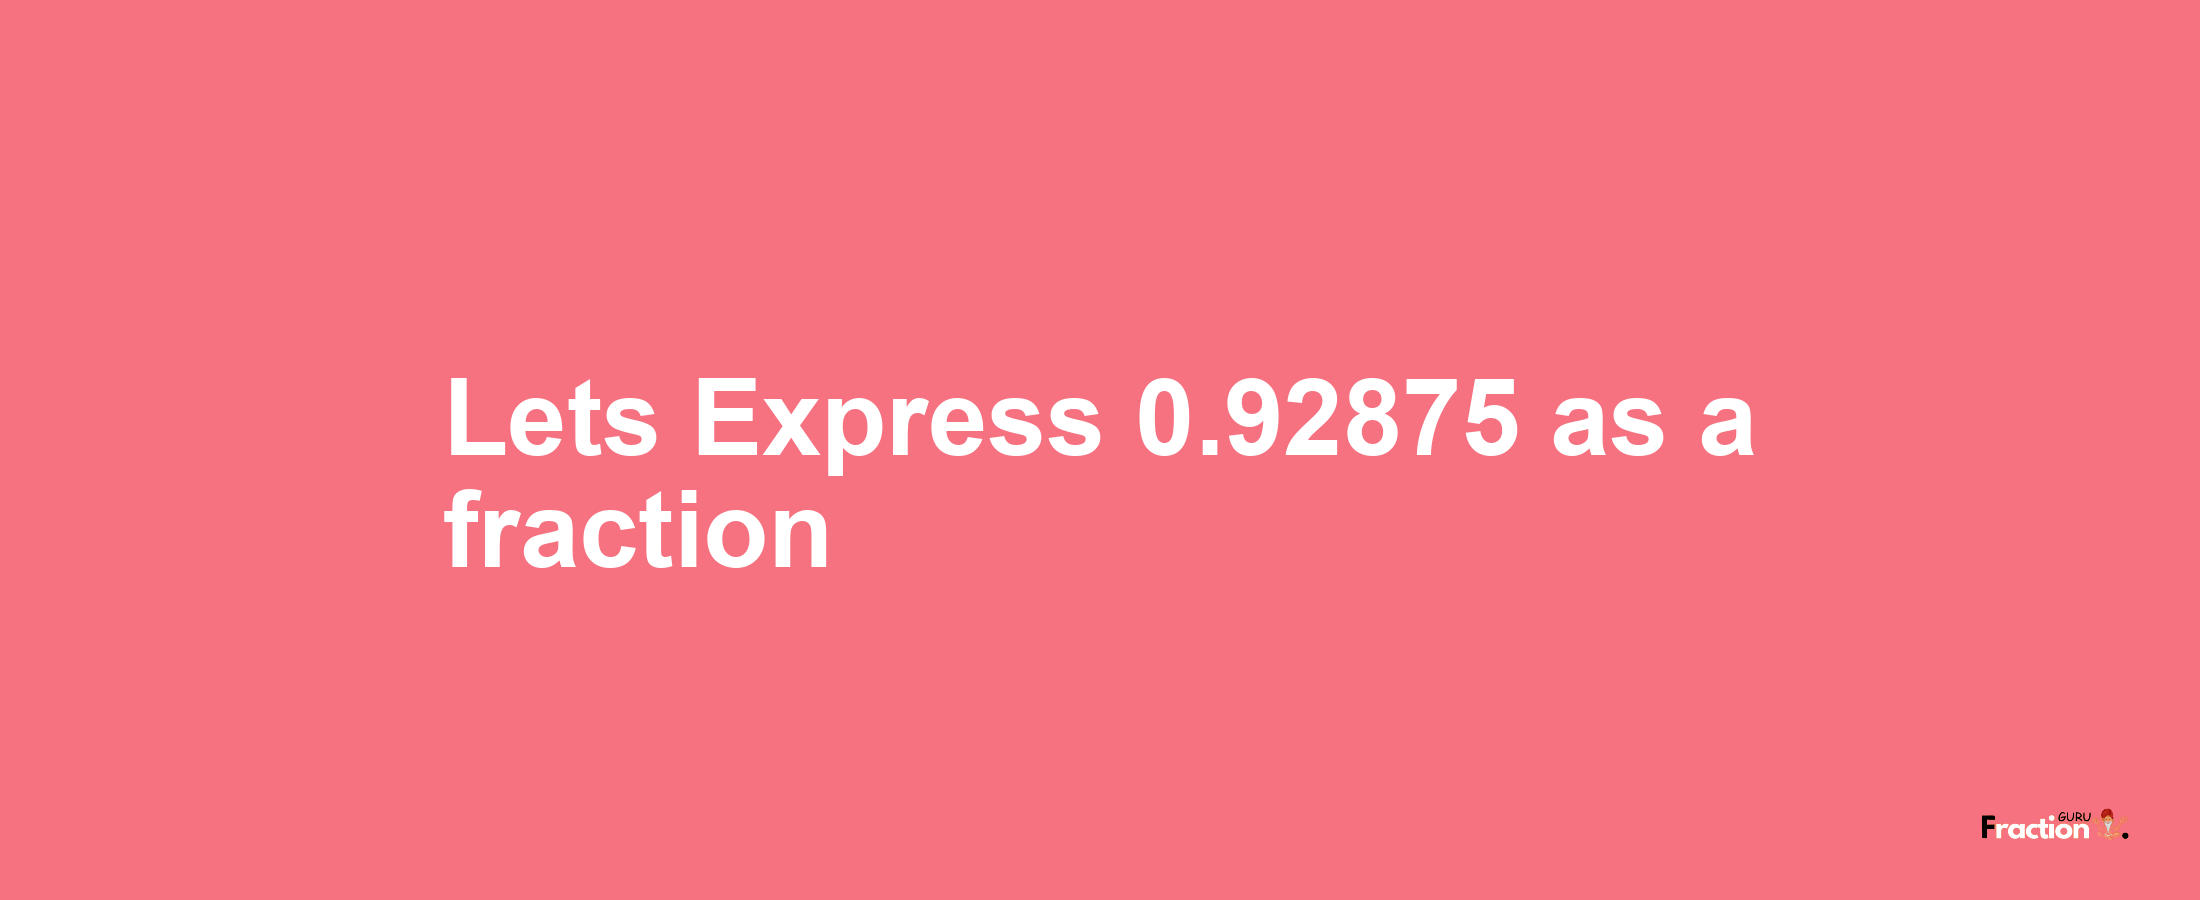 Lets Express 0.92875 as afraction